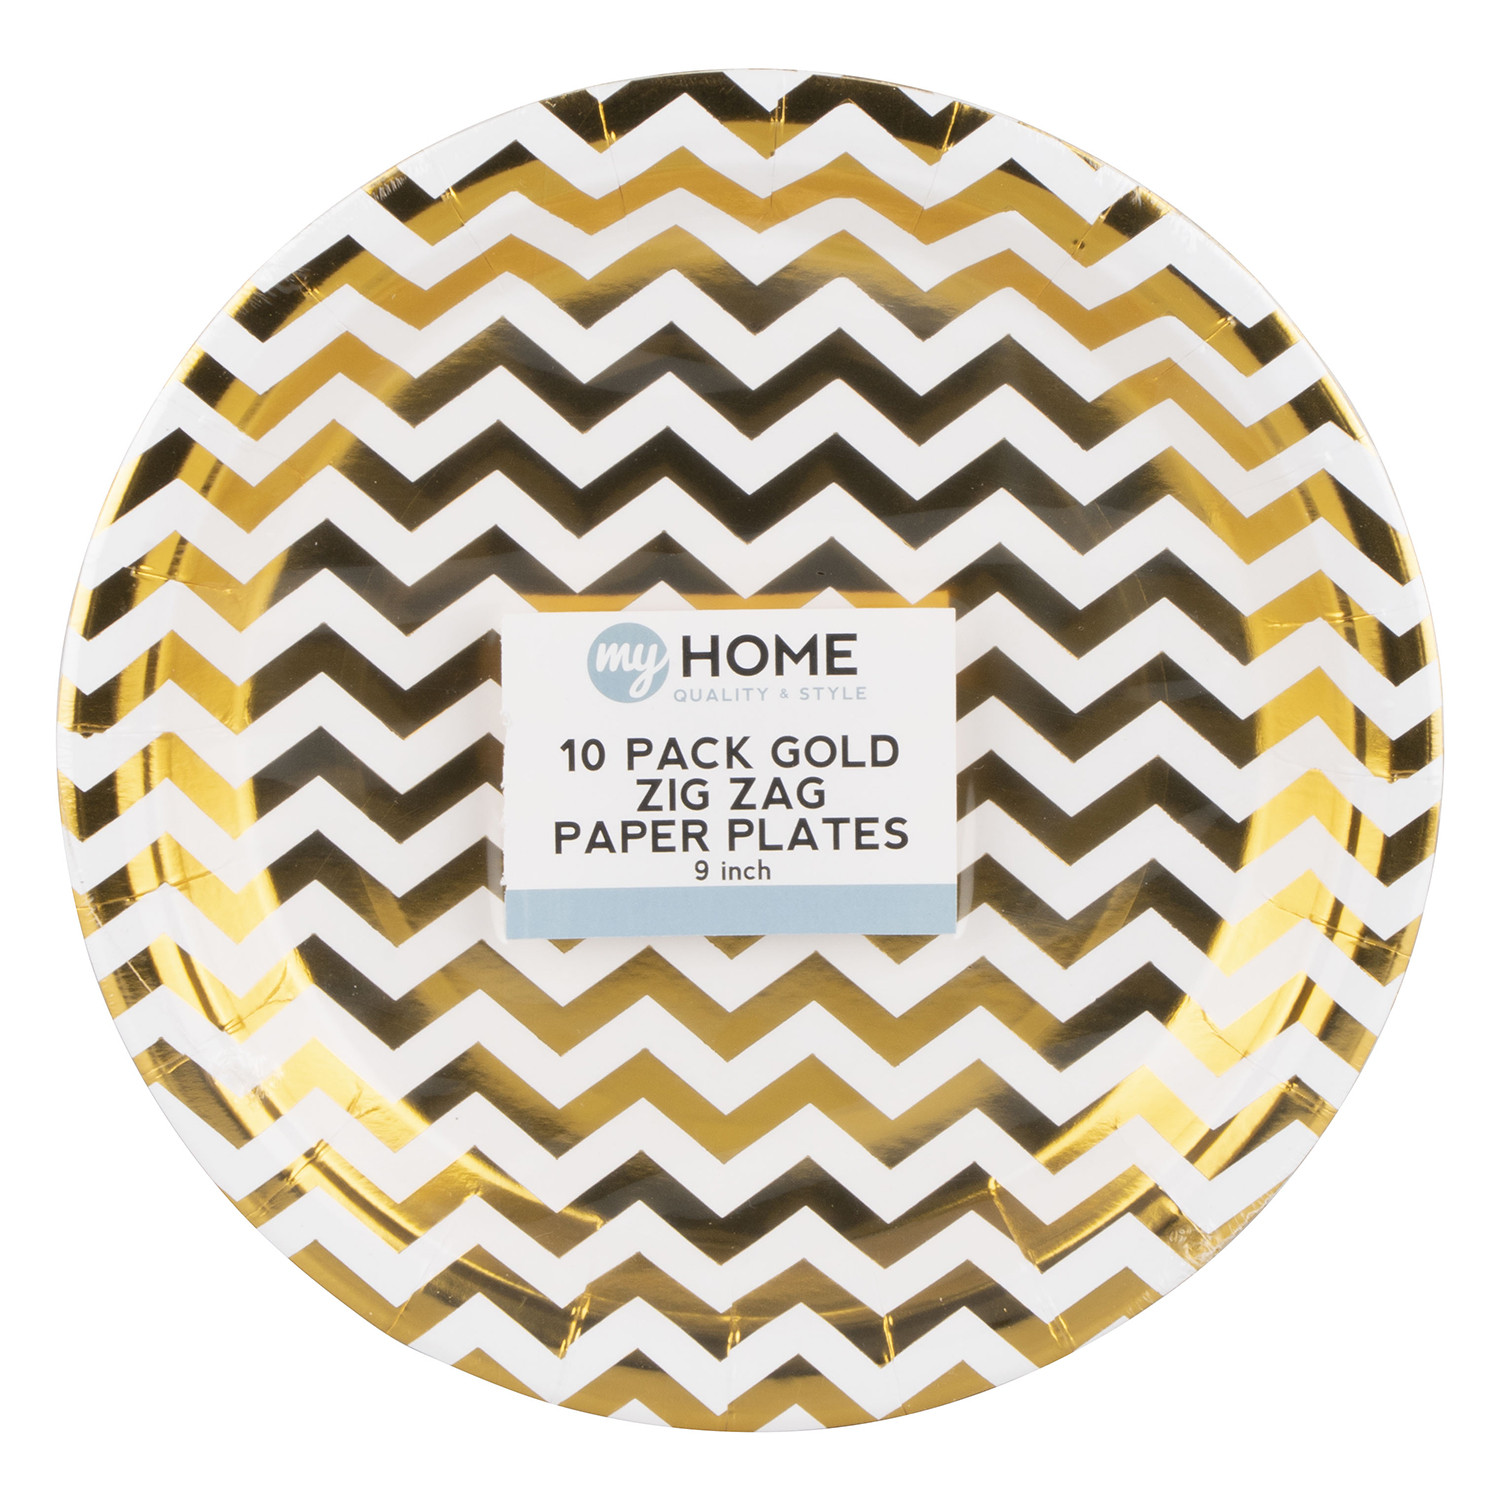 My Home Gold Zig Zag Paper Plates 10 Pack Image